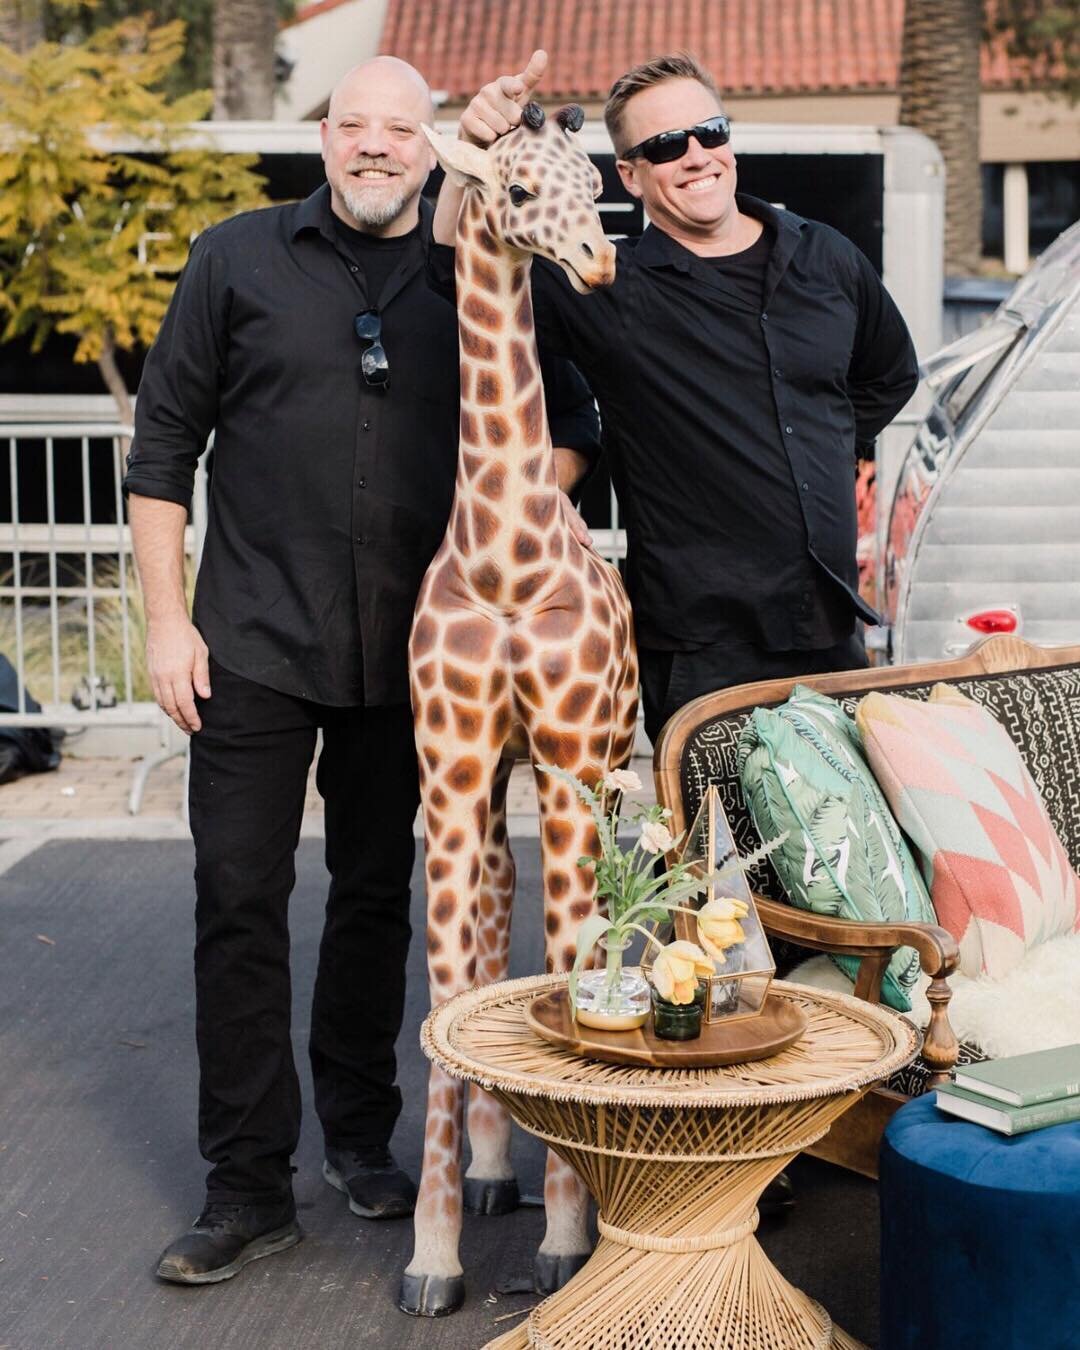 Liquid Cult rang in the new year with one of Santa Barbara&rsquo;s finest! #lloydthegiraffe, you are one party animal! 🦒🤘🏼
Vendor props🍻
Photo by @annadelores
Planning and design by @onyxandredwood
Rentals by @avenuetwelverentals
Floral by @cocor